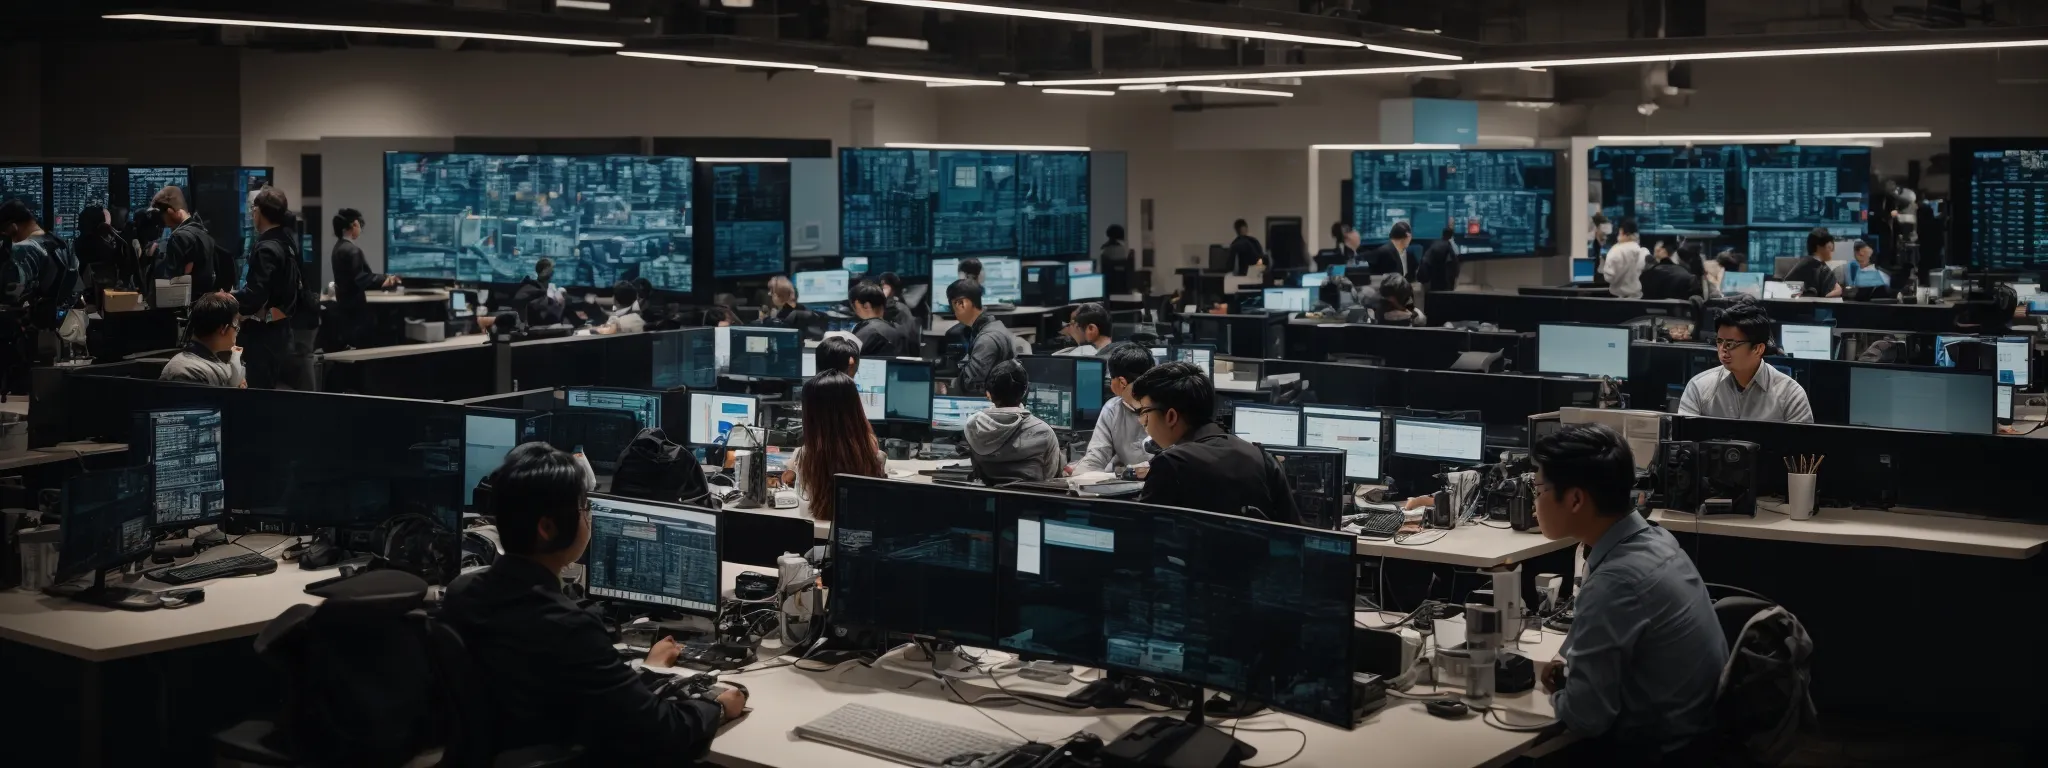 a bustling command center with individuals intently gathered around computers, strategizing and coordinating the complexities of the seo contest.